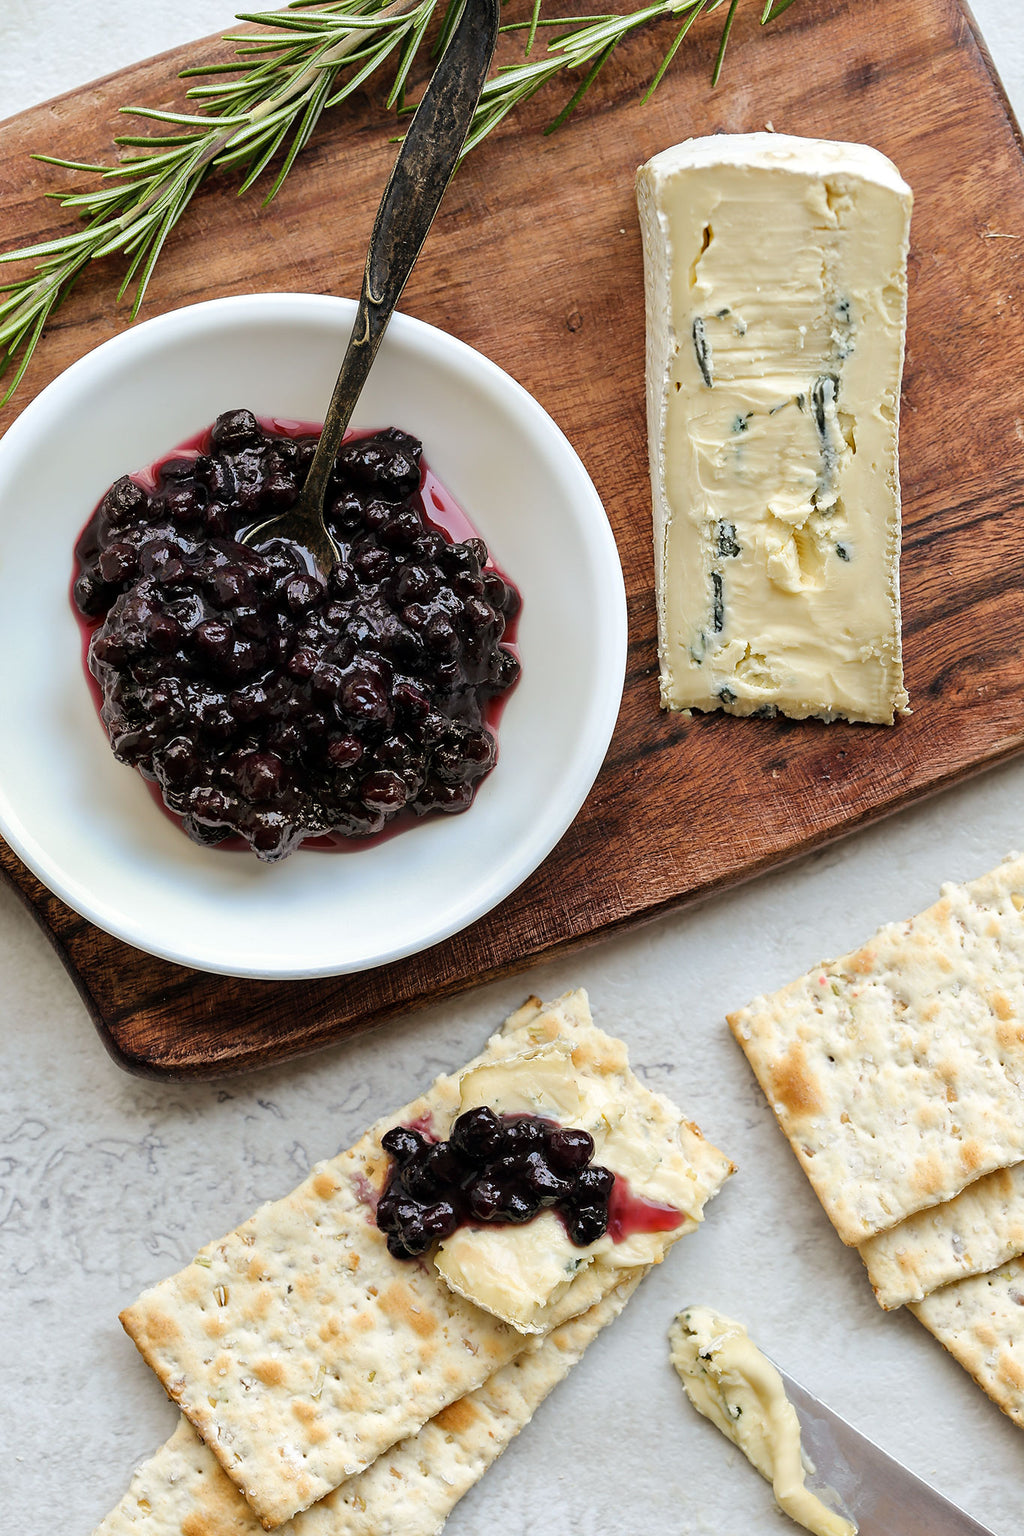 Wild Blueberry Jam Compote and Blue Cheese | Wozz Kitchen Creations